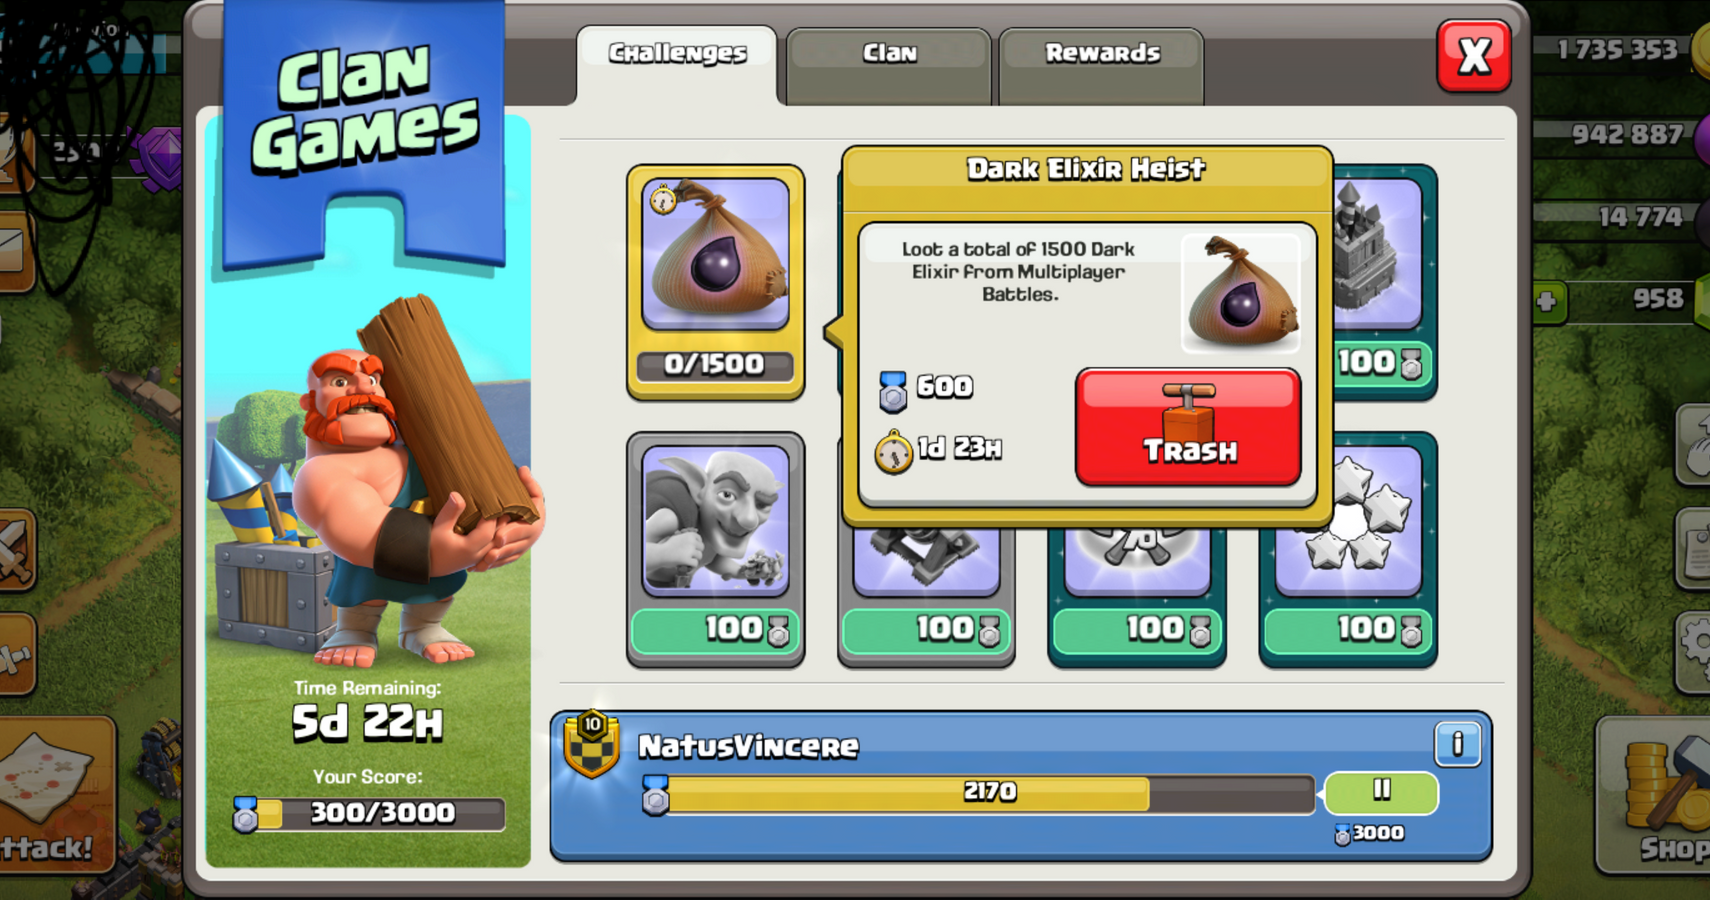 clan games challenges